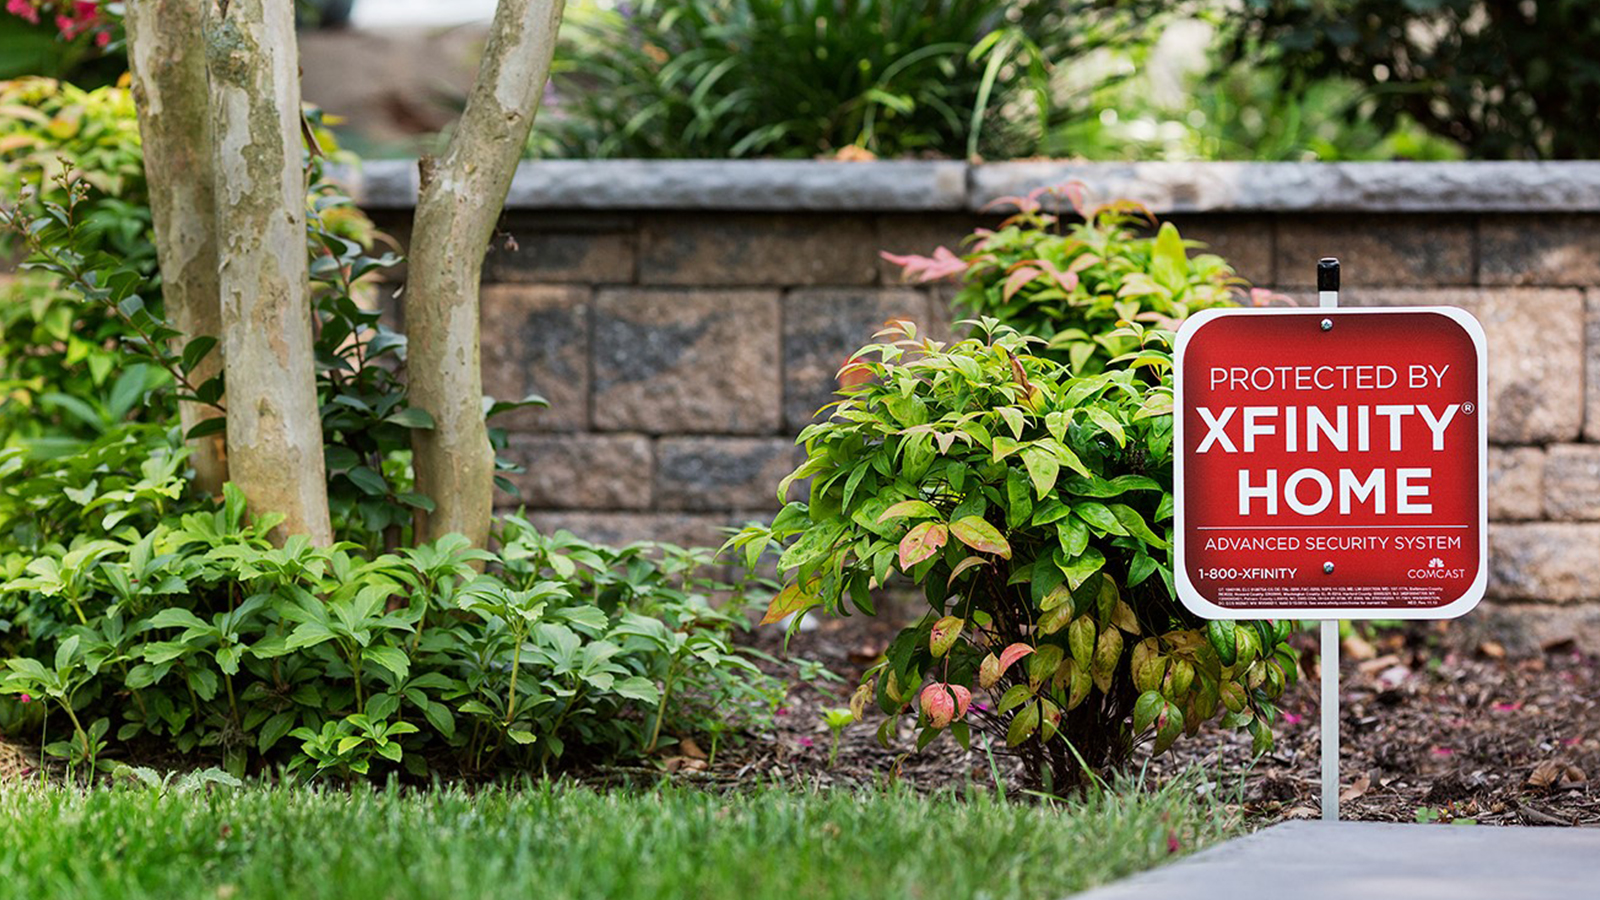 An Xfinity Home sign staked into a lawn.